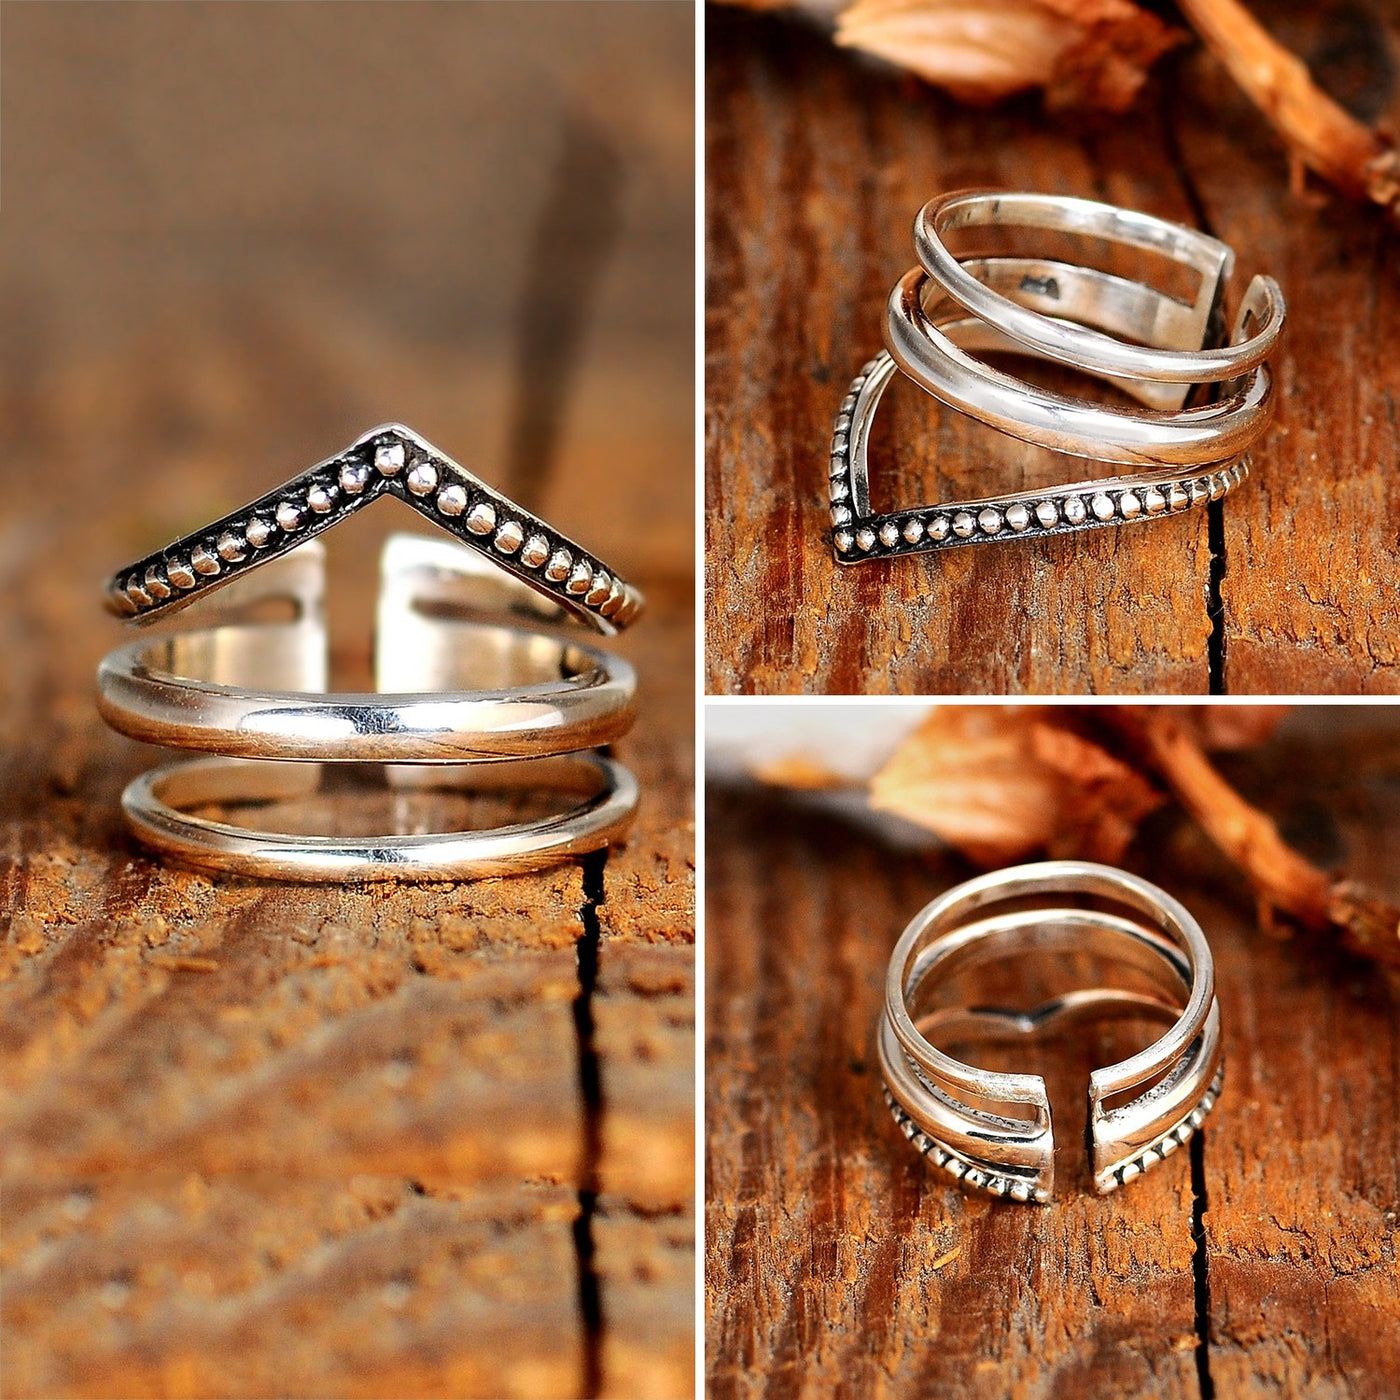 Chevron Sterling Silver Ring Great for Thumb